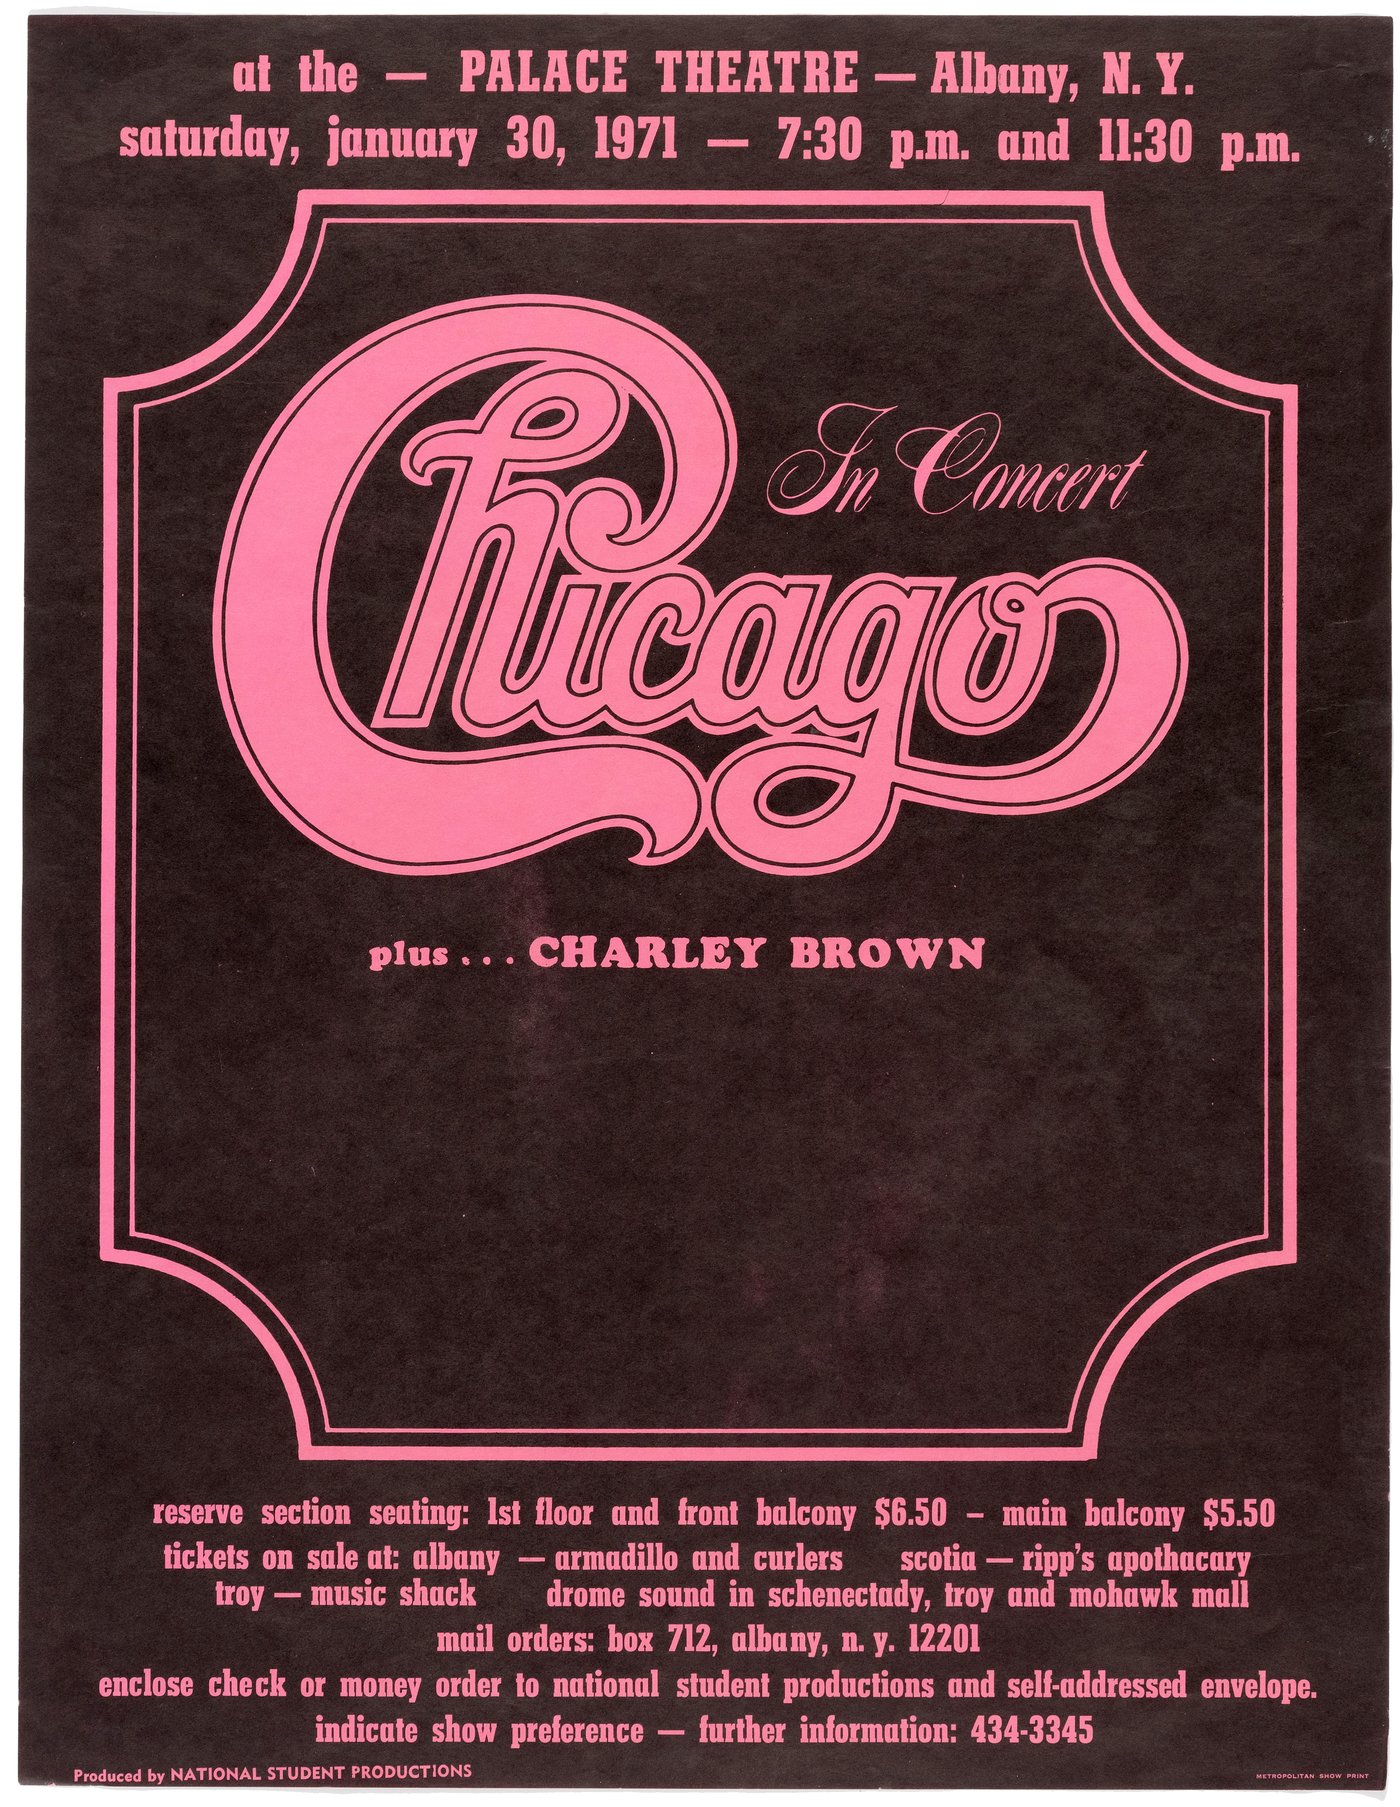 Hake's CHICAGO 1971 PALACE THEATRE ALBANY, NY CONCERT POSTER.